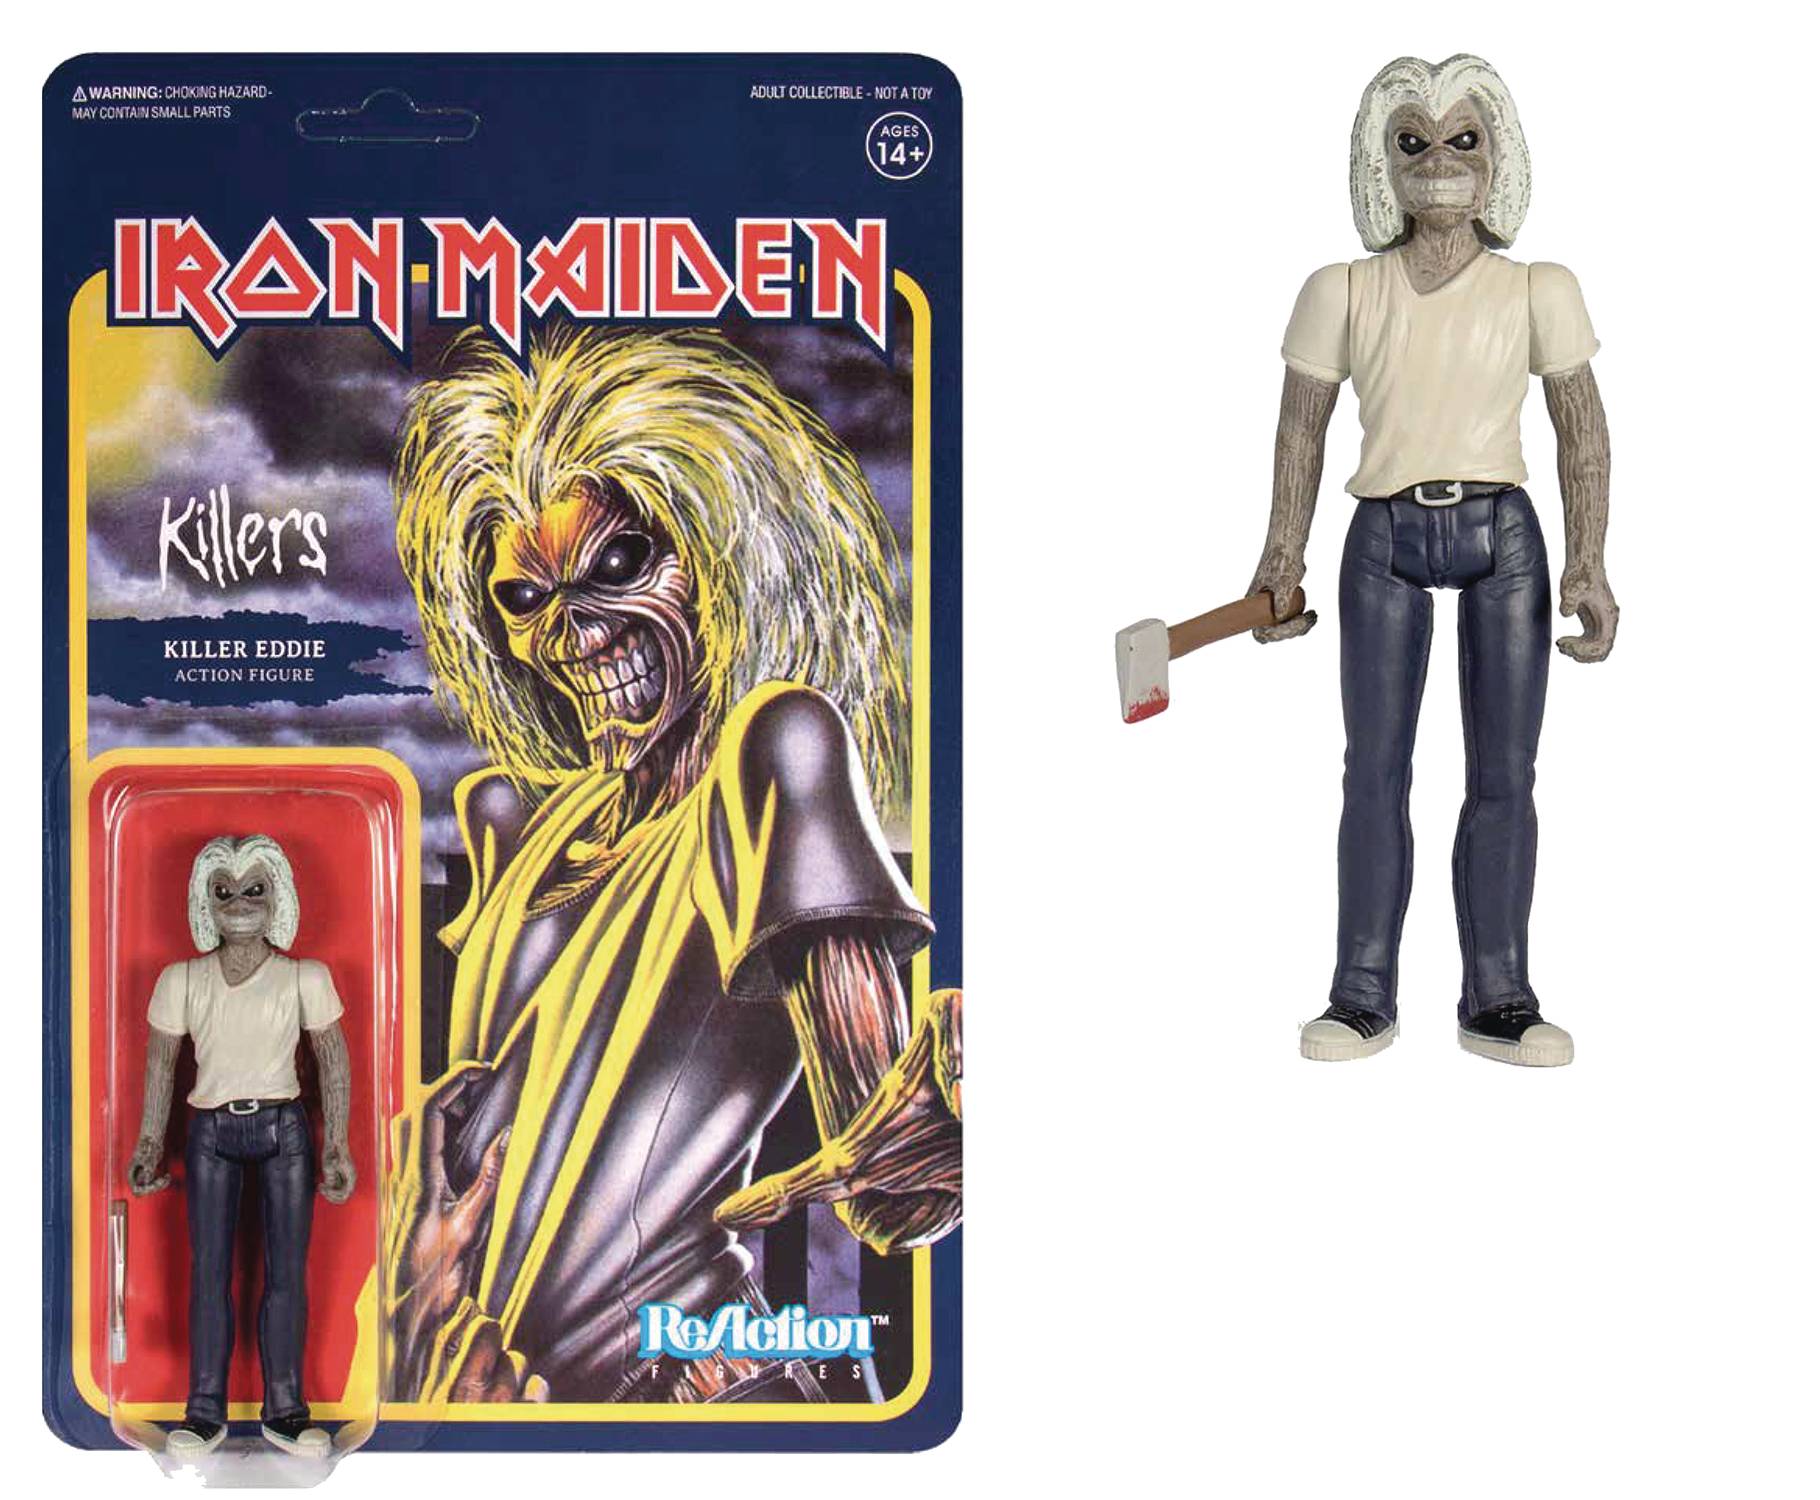 IRON MAIDEN KILLERS EDDIE REACTION FIGURE (NET) (C: 1-1-2) | L.A. Mood Comics and Games